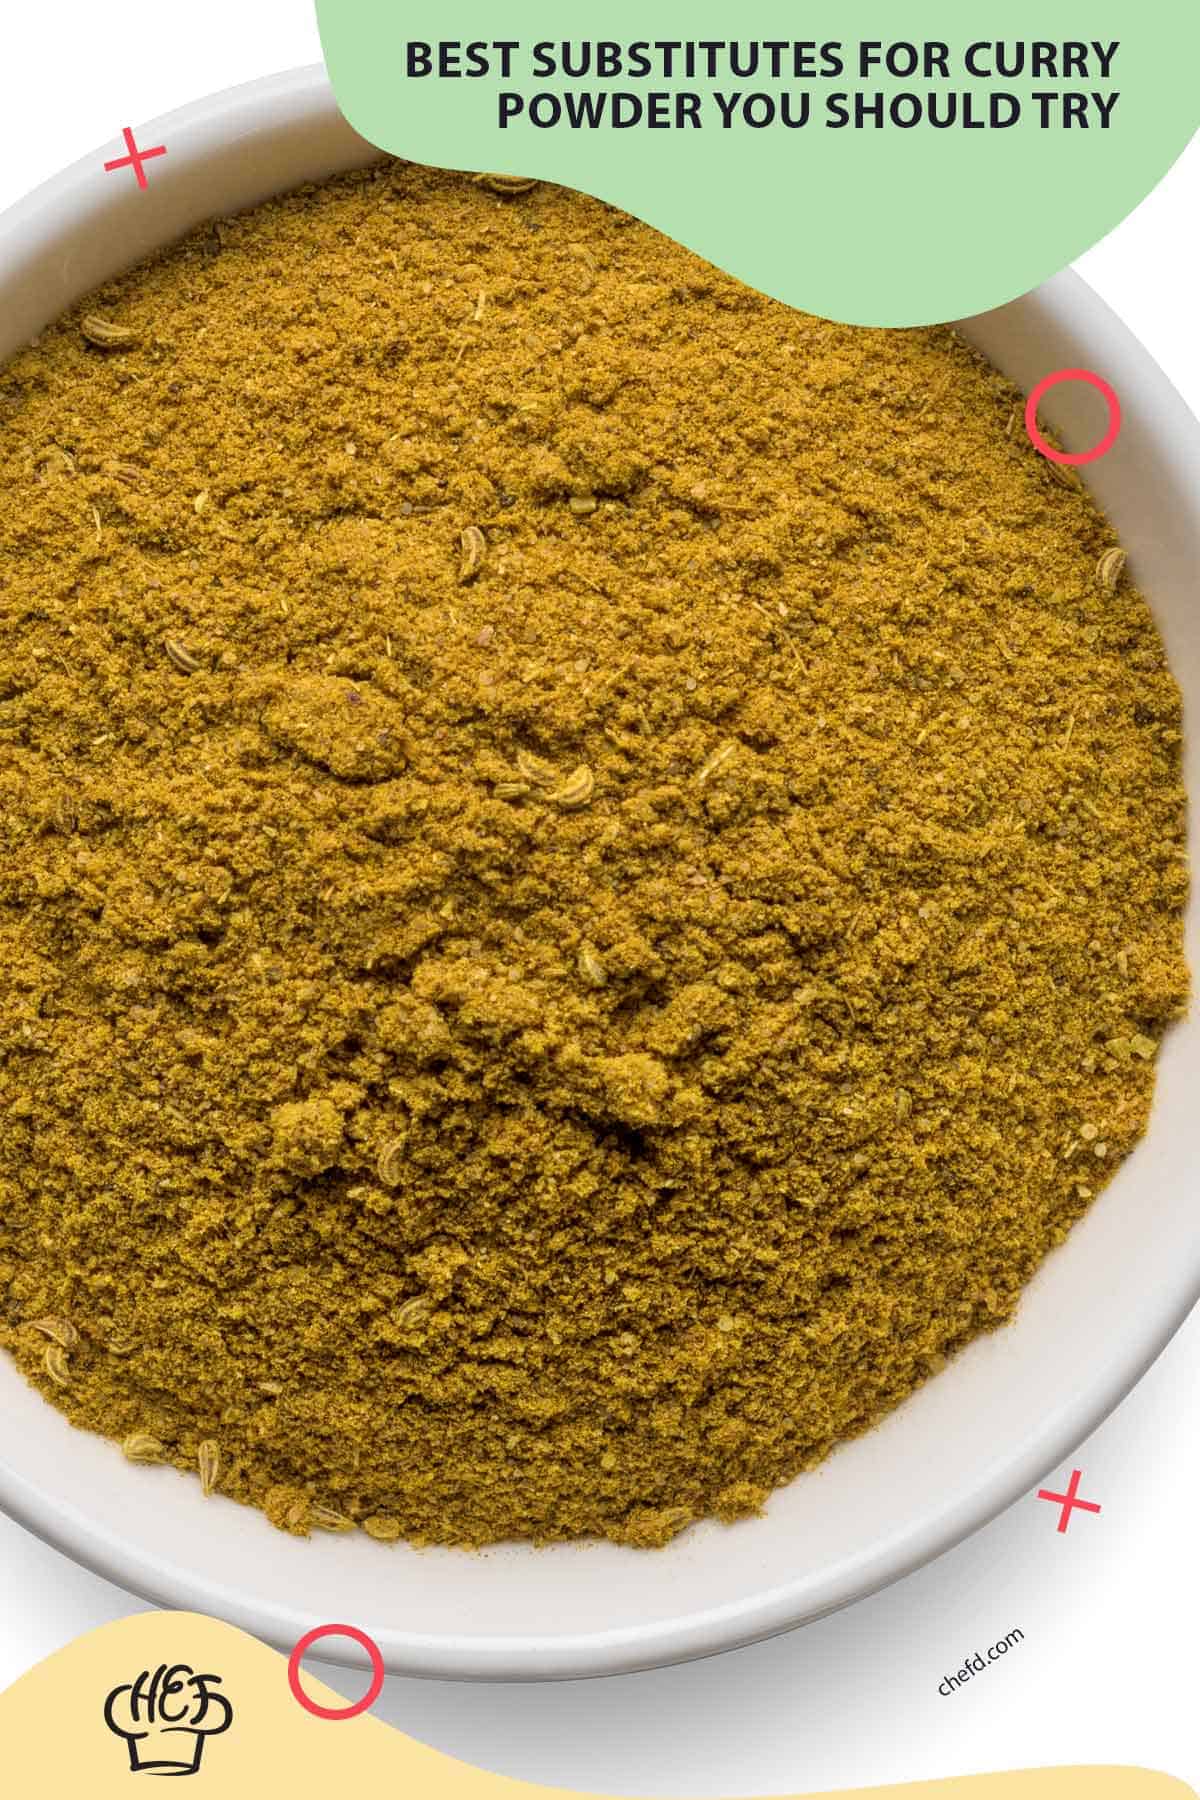 Best Substitutes For Curry Powder